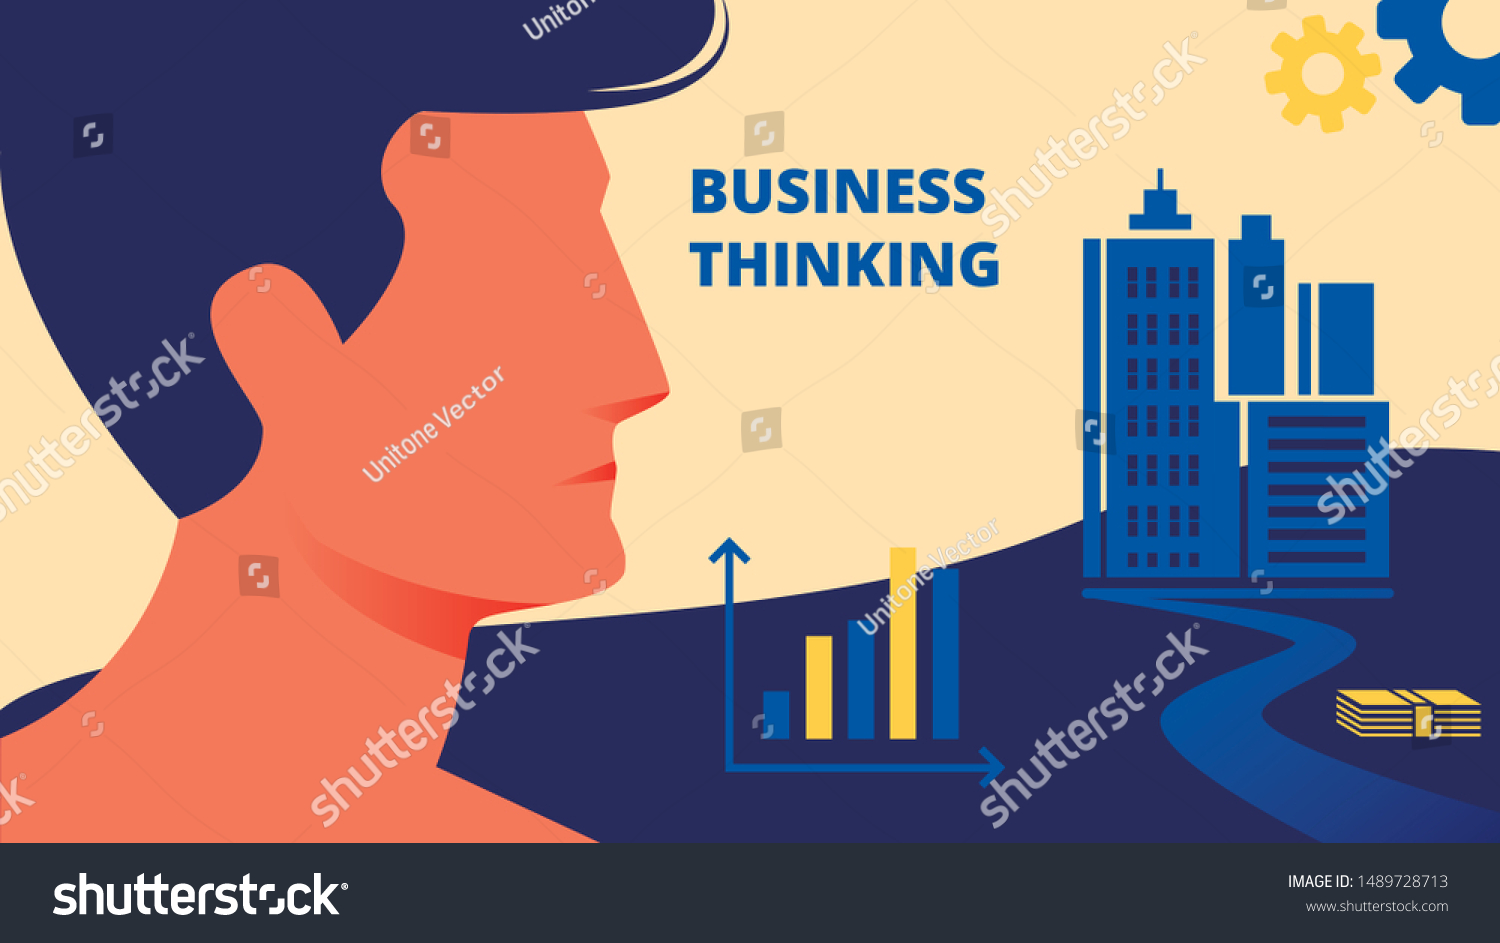 Profile Picture Man on City Background. Business Thinking. Advertising Image. Cartoon Flat Vector Illustration. Man Face with Short Black Hair in Profile. Man Thought. Design Training. #1489728713